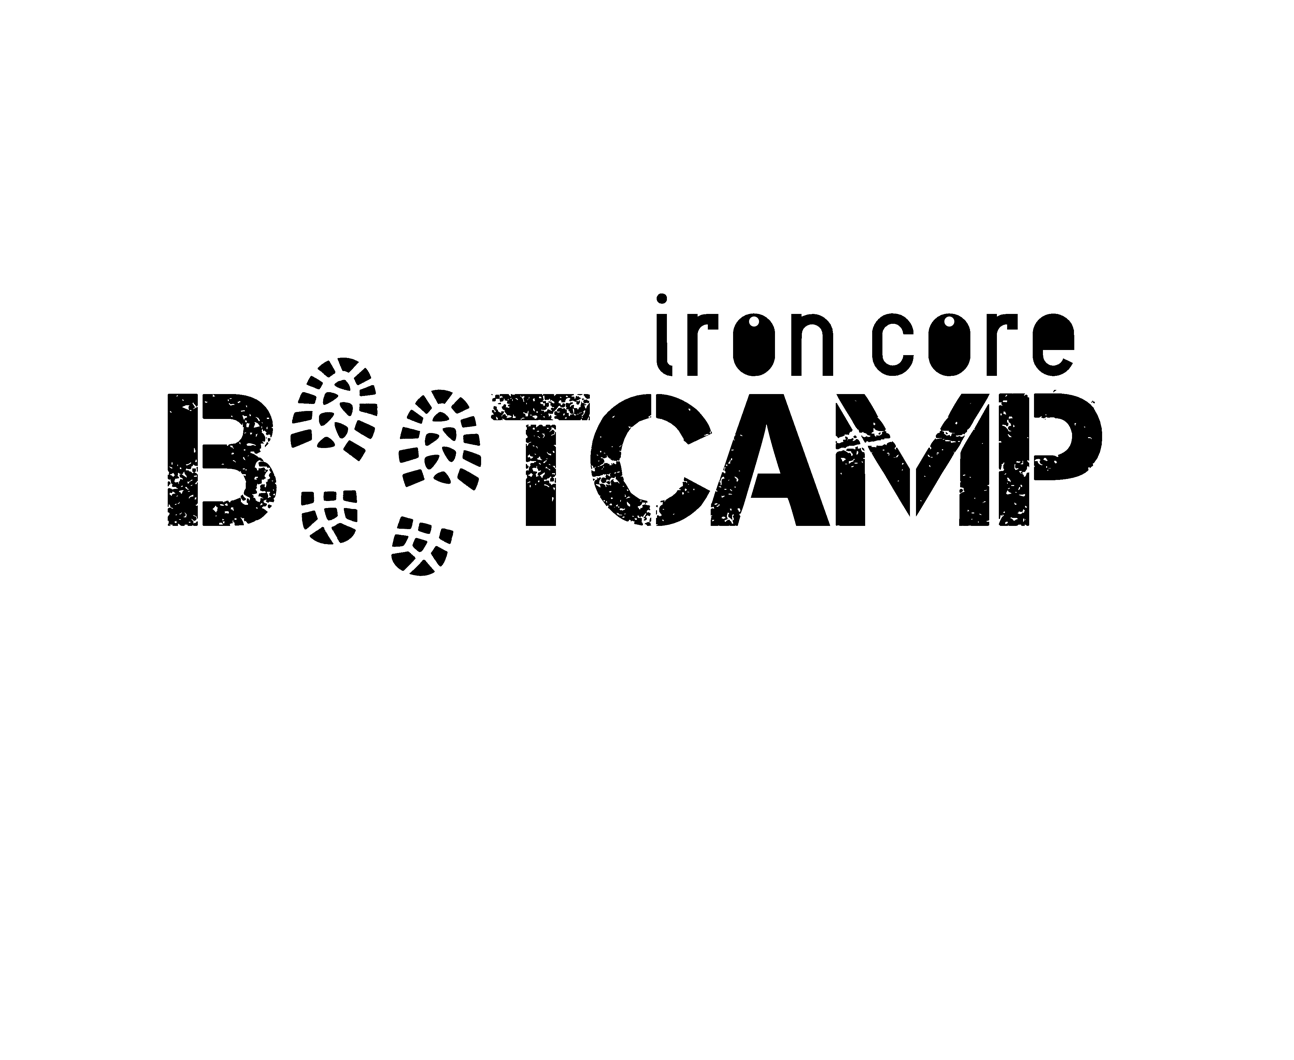 Why ironcore?